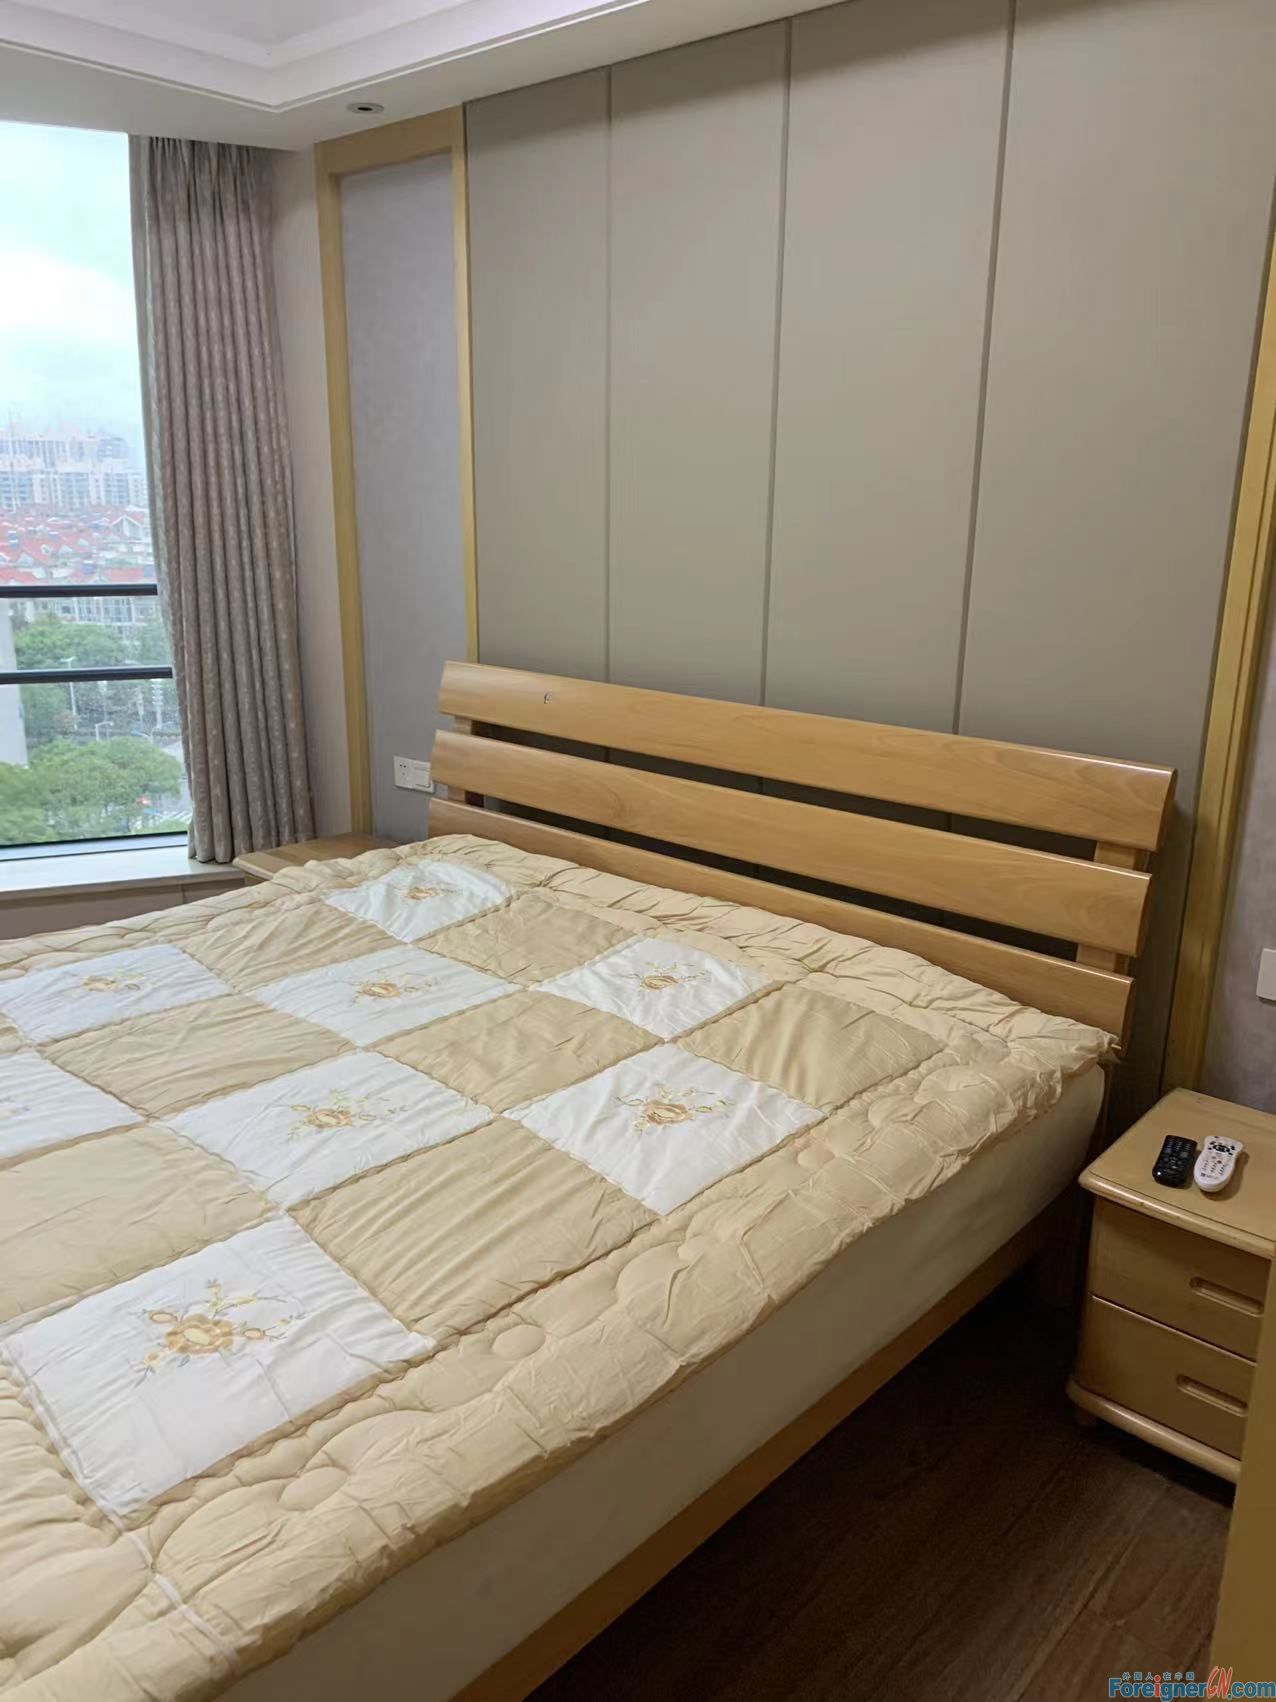 Fantastic！！Great apartment rent in Suzhou/First to rent/2 bedrooms and 1 bathroom/new and light-colored wooden furniture/Well kept/Xinghai Square/CBD of West Jinji lake